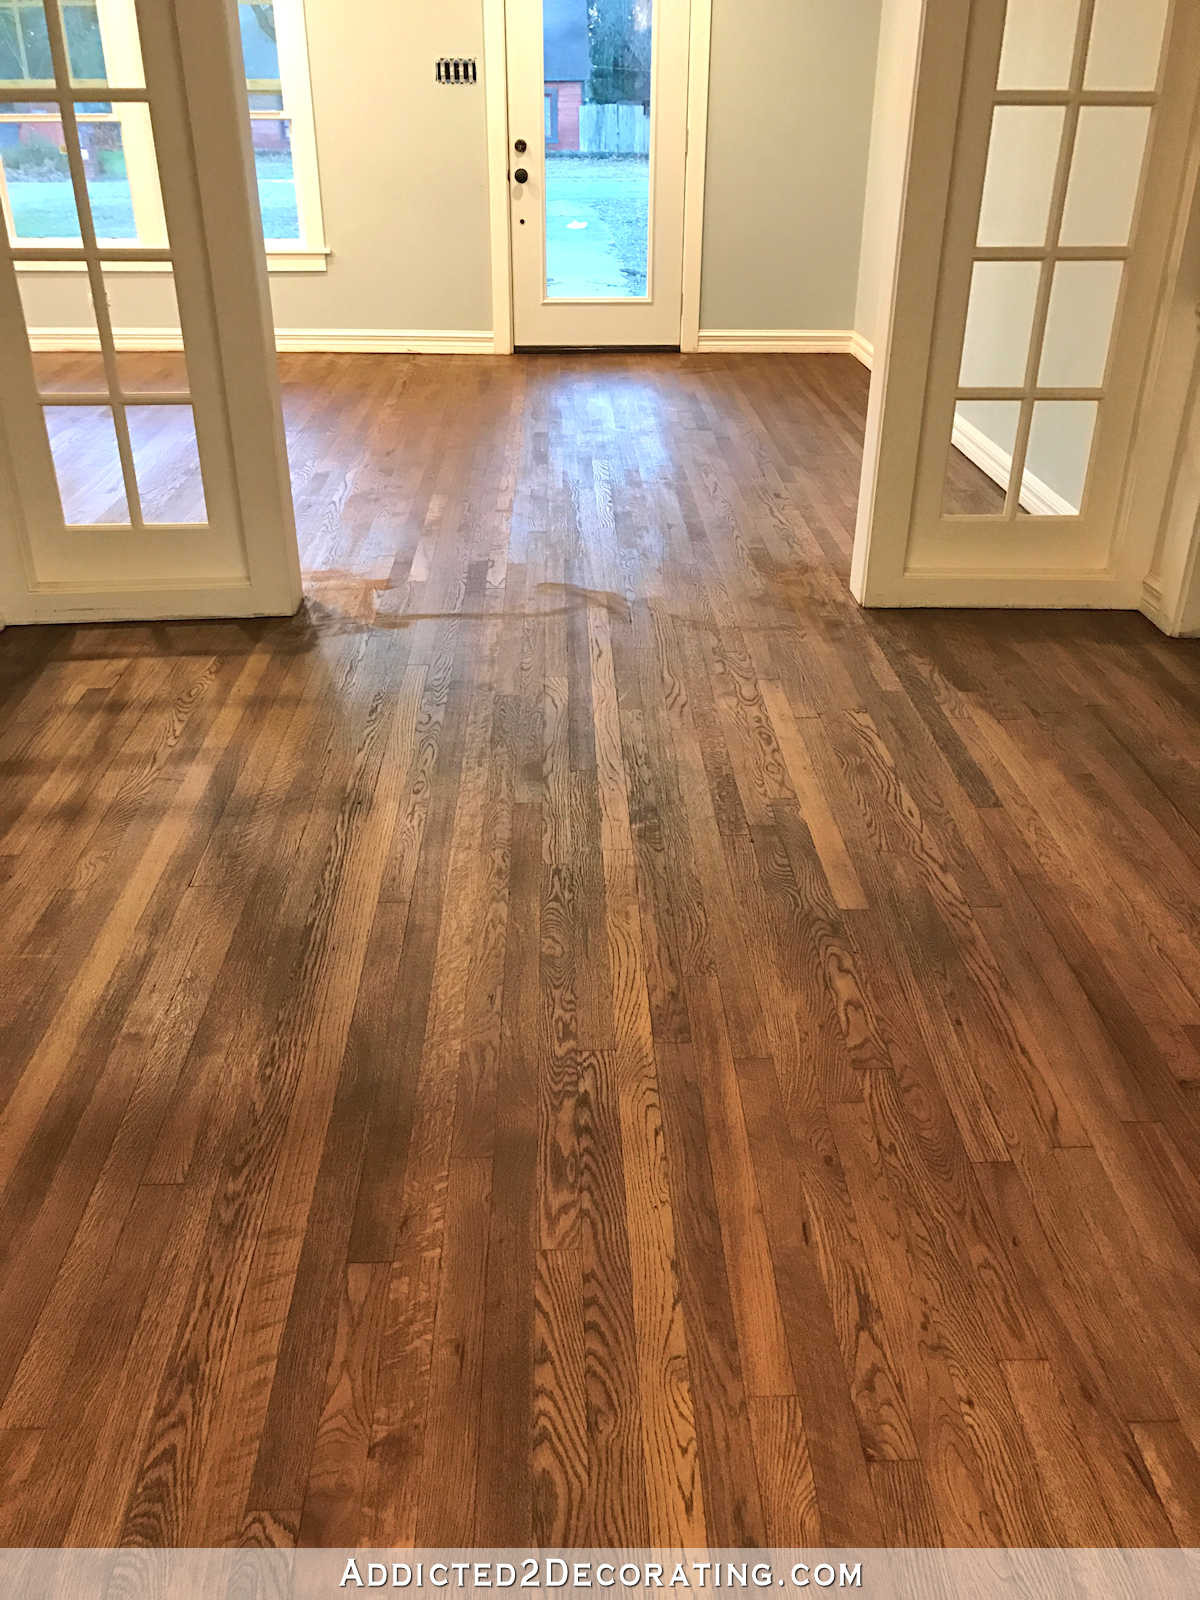 19 Recommended How to Refinish Hardwood Floors Video 2024 free download how to refinish hardwood floors video of adventures in staining my red oak hardwood floors products process intended for staining red oak hardwood floors 9 stain on entryway and music room f